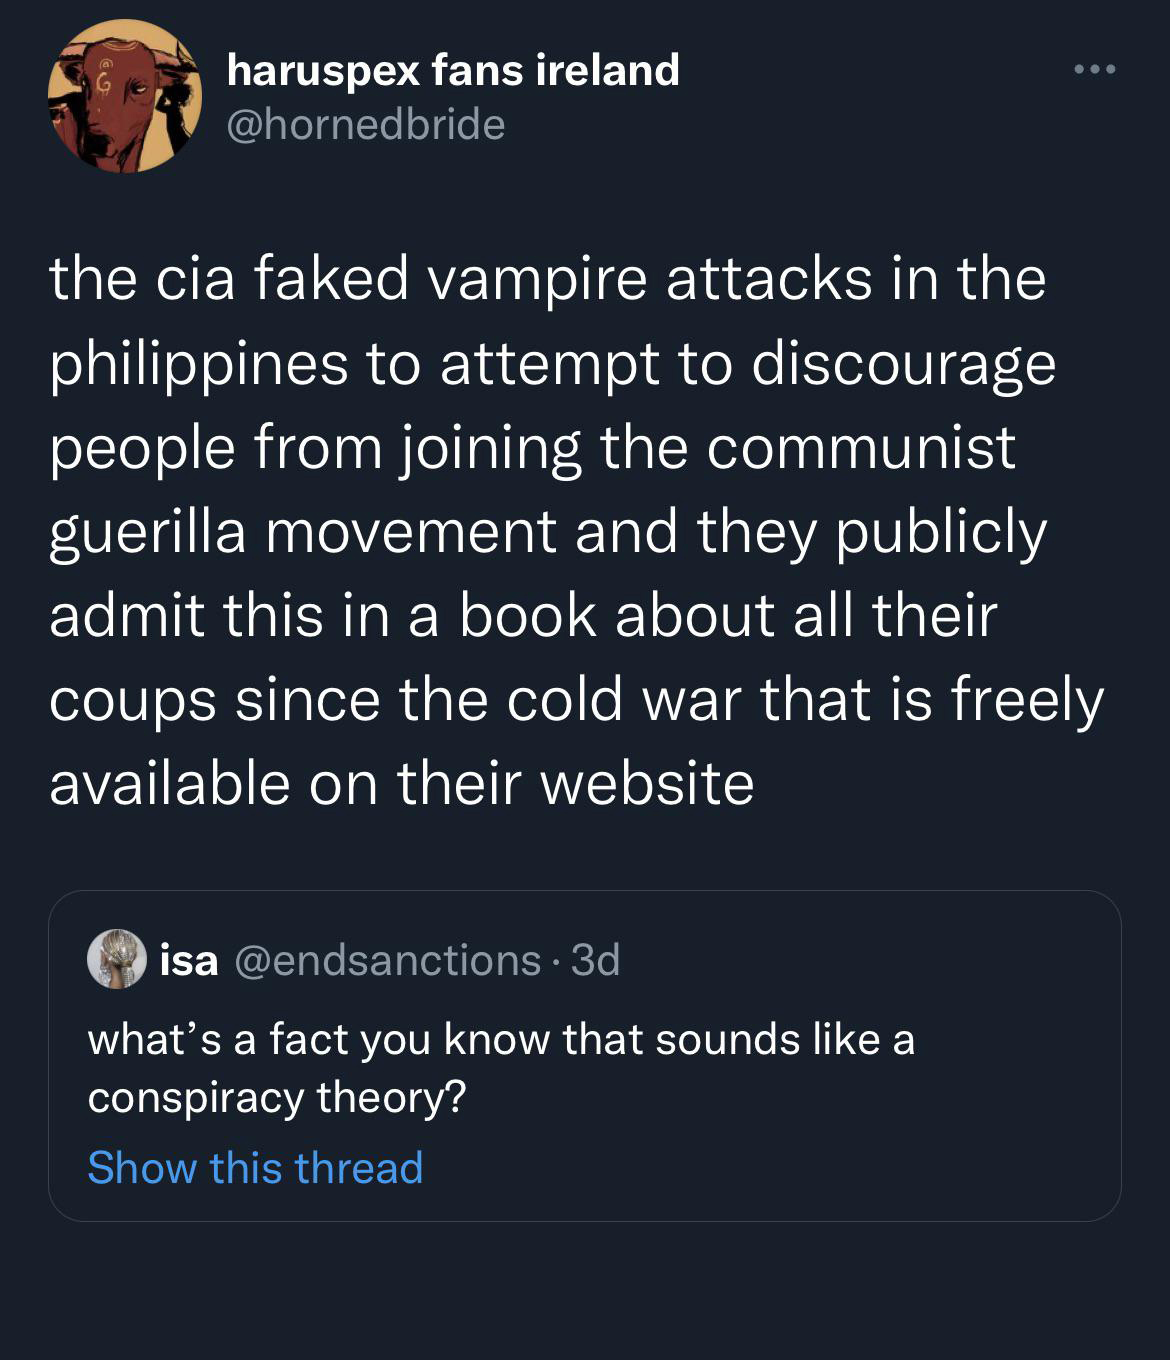 funny tweets - hot tweets - twitter memes - screenshot - . haruspex fans ireland the cia faked vampire attacks in the philippines to attempt to discourage people from joining the communist guerilla movement and they publicly admit this in a book about all